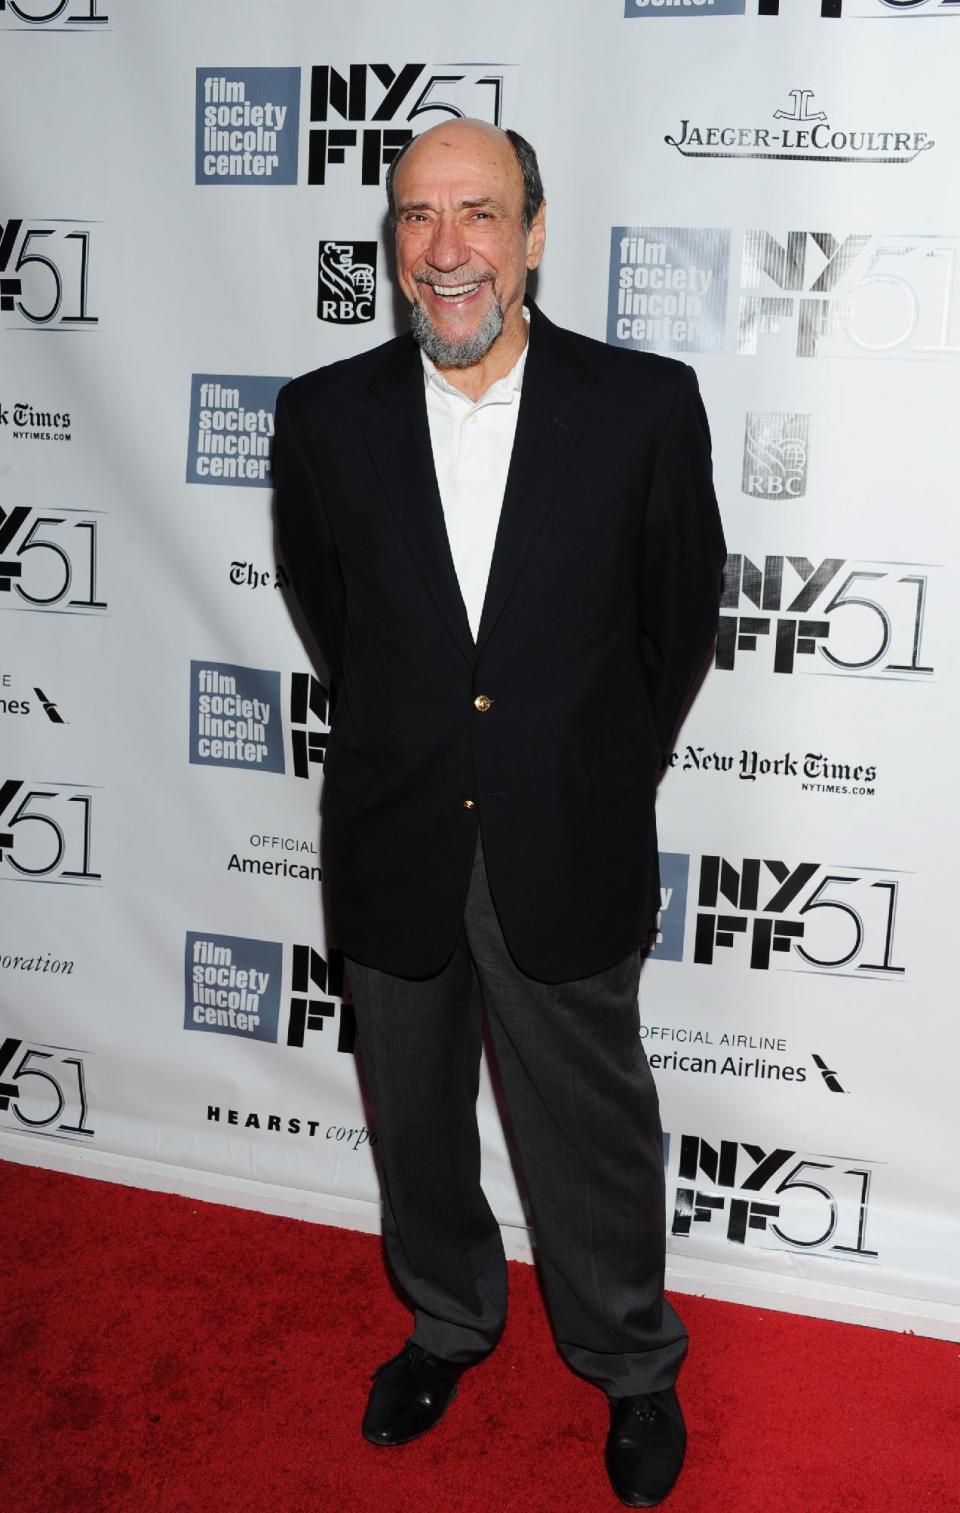 FILE - In this Sept. 28, 2013 file photo, actor F. Murray Abraham attends the premiere of "Inside Llewyn Davis" during the 51st New York Film Festival, in New York. While the provocative musical "The Threepenny Opera" celebrates lowlifes, the upcoming production by the Atlantic Theater Company will star some royalty _ Tony Award nominee Laura Osnes, Academy Award winner Abraham and Emmy Award winner Michael Park. The Atlantic announced the line-up Wednesday, Jan. 22, 2014, which also includes Tony nominee Mary Beth Peil, and Broadway veterans Sally Murphy and Rick Holmes. (Photo by Evan Agostini/Invision/AP, File)